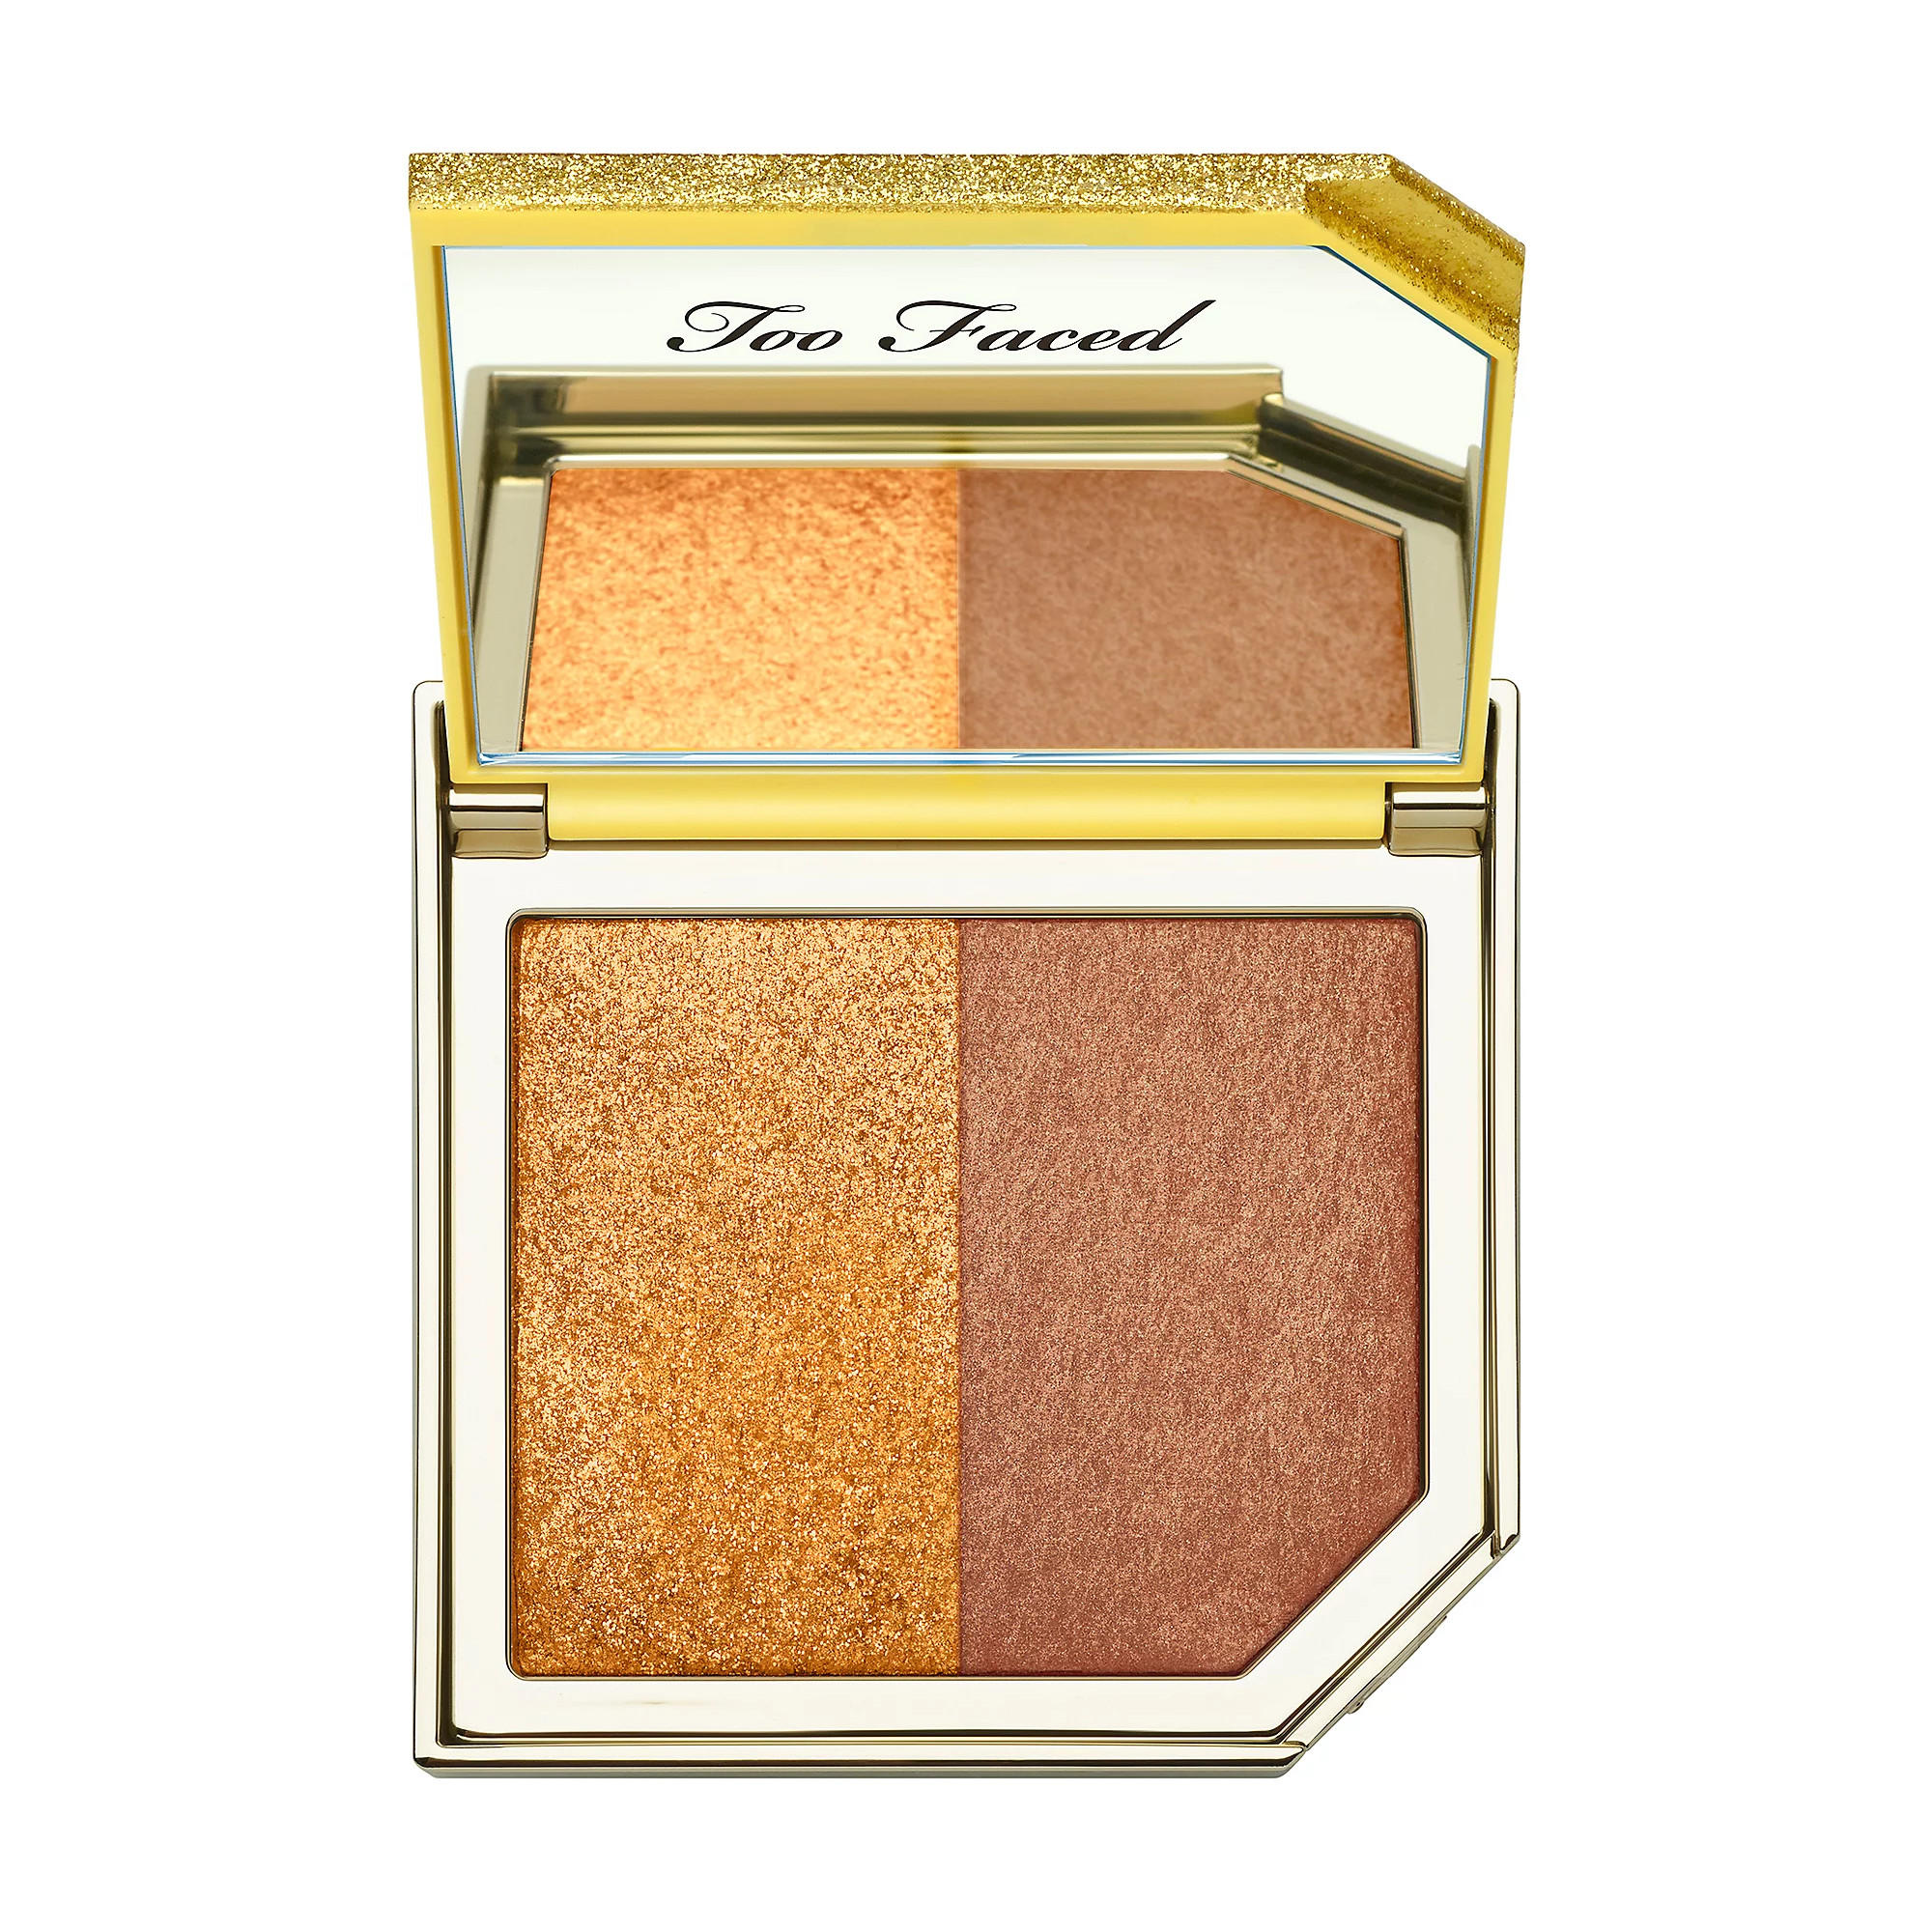 Too Faced Strobing Bronzer Toasted Pineapple